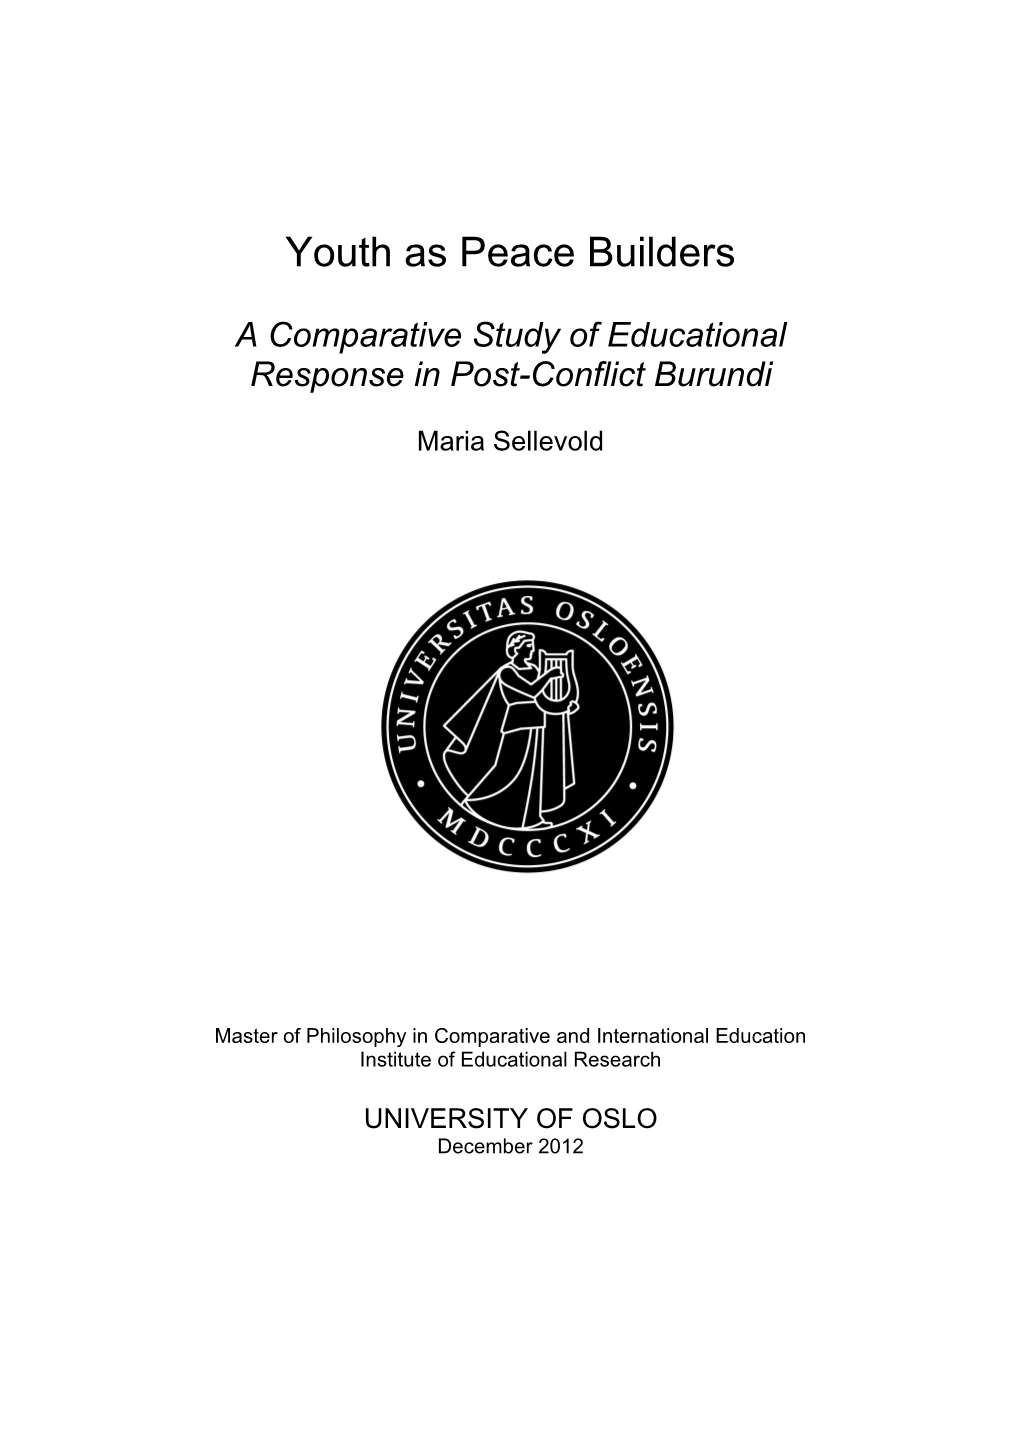 Youth As Peace Builders